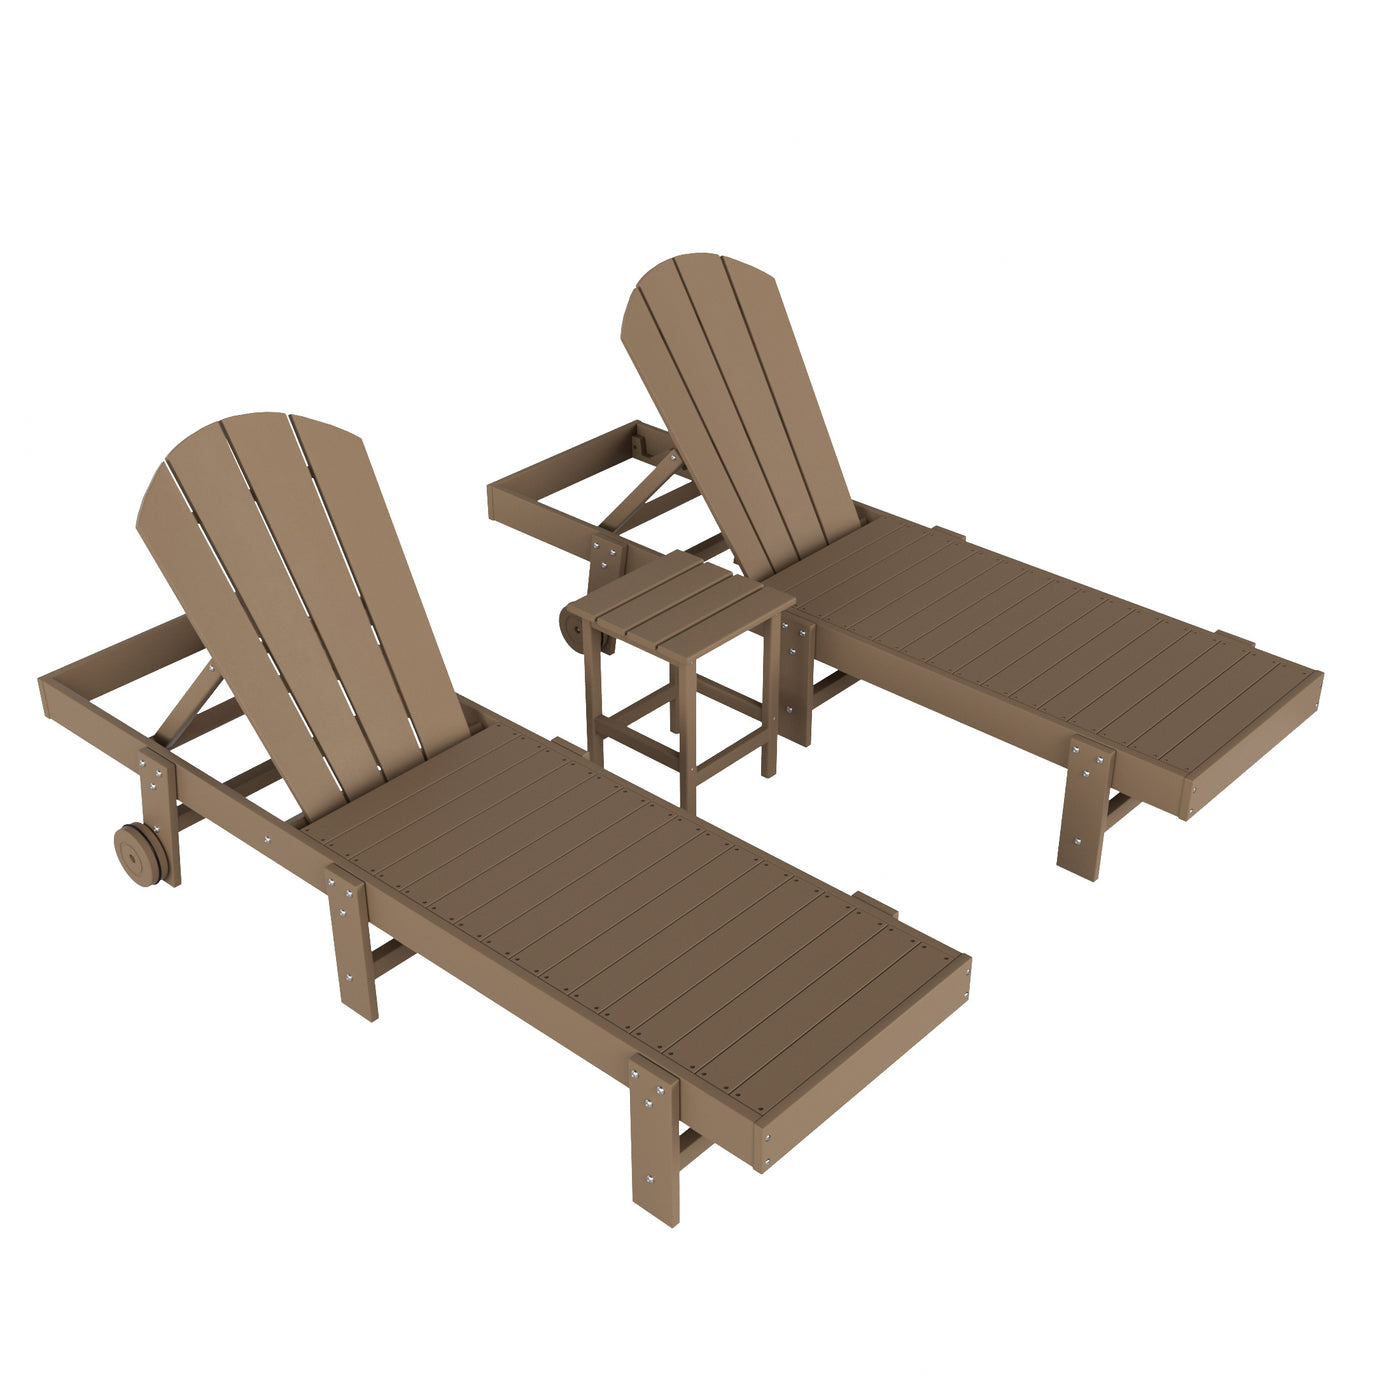 Malibu 3 Piece Poly Reclining Chaise Lounge With Wheels